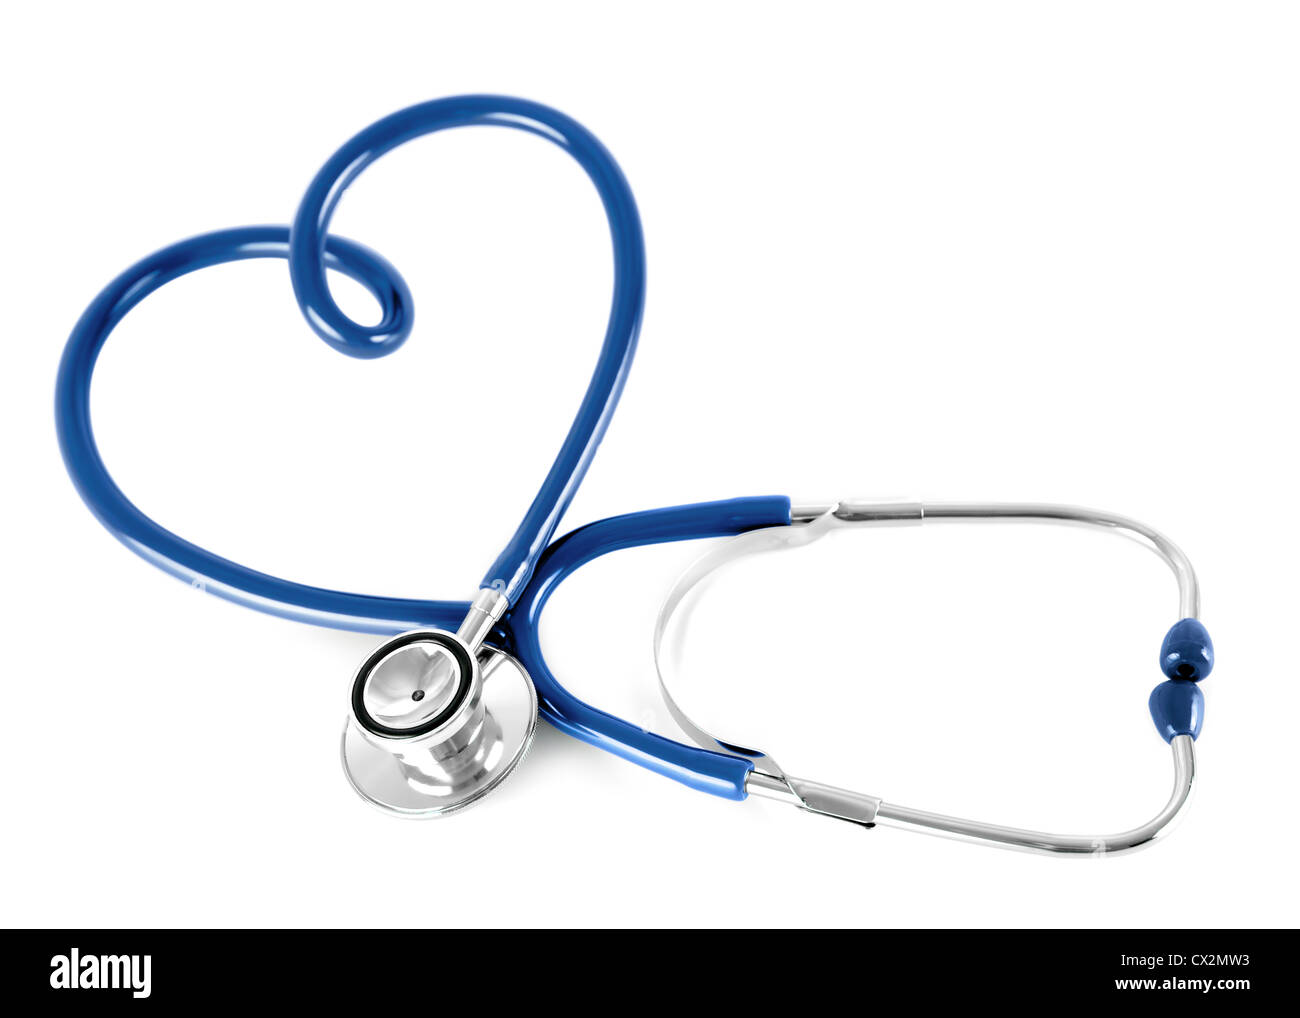 blue stethoscope in shape of heart, isolated on white Stock Photo